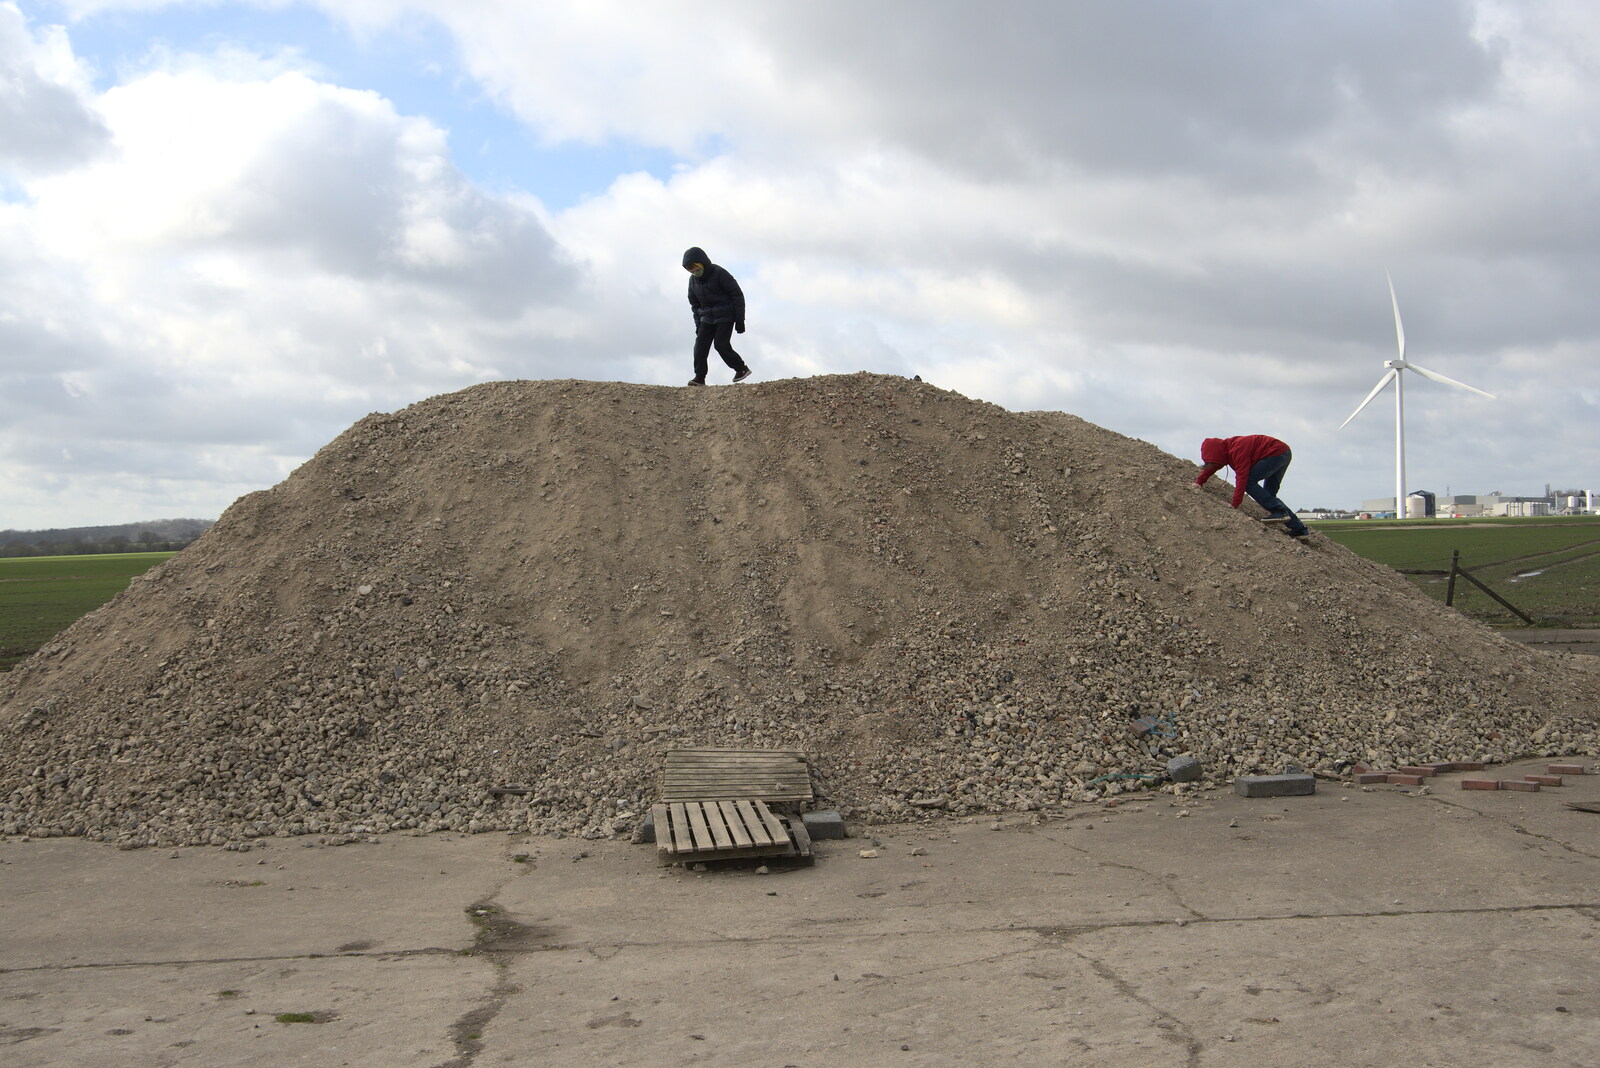 The boys climb a crushed-concrete hill from Another Walk on Eye Airfield, Eye, Suffolk - 14th March 2021